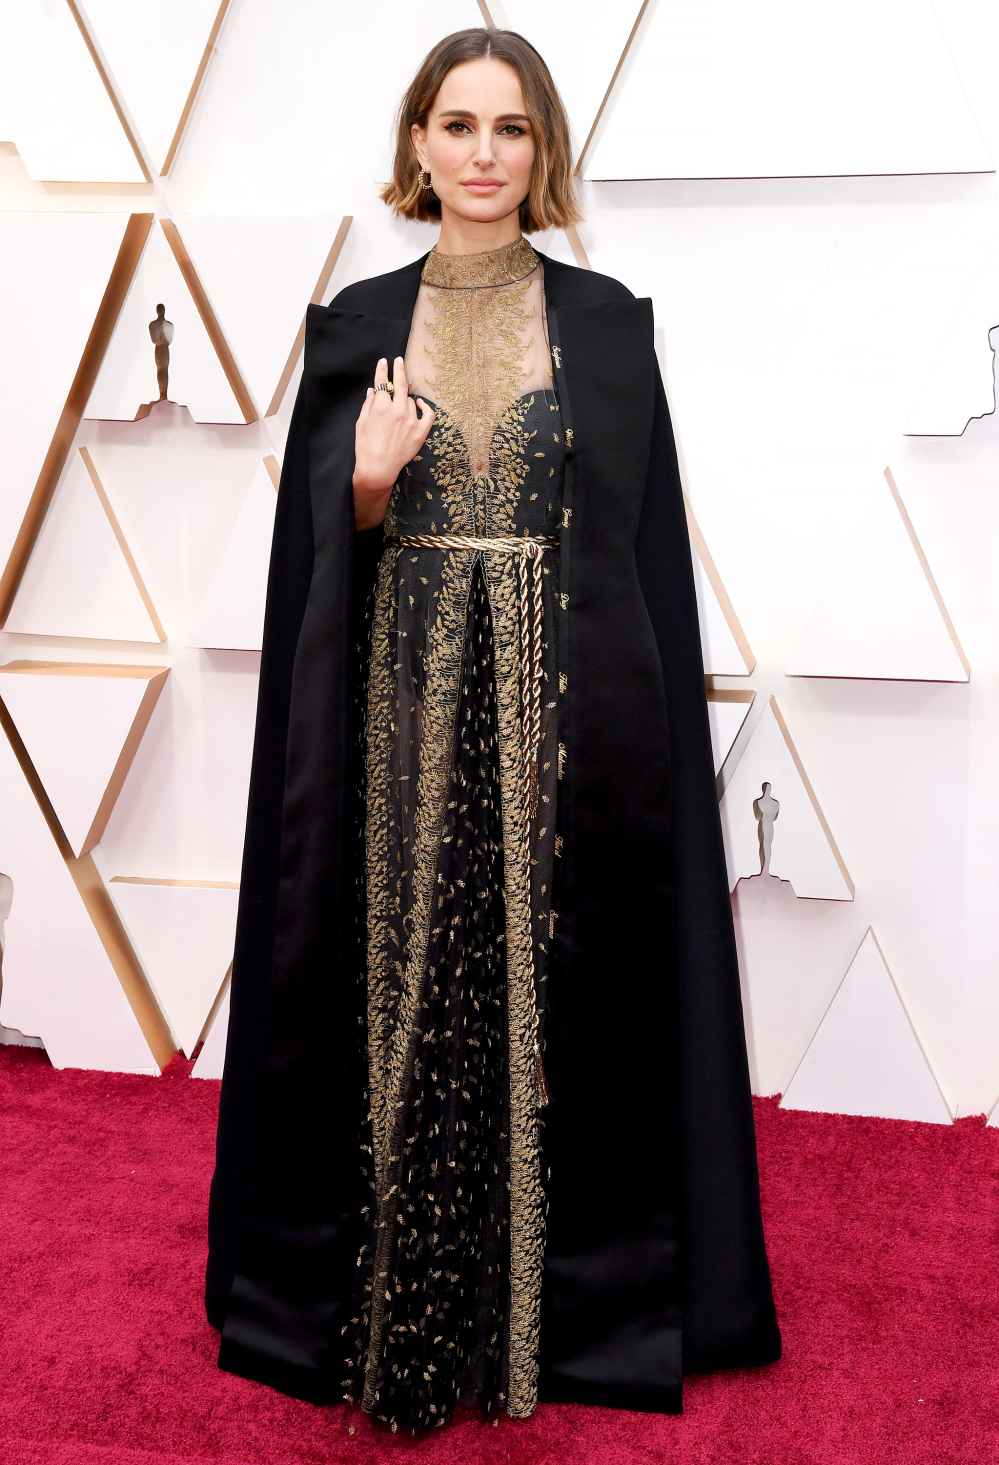 Natalie Portman Honors Snubbed Female Directors With Stunning Oscars Cape 2020